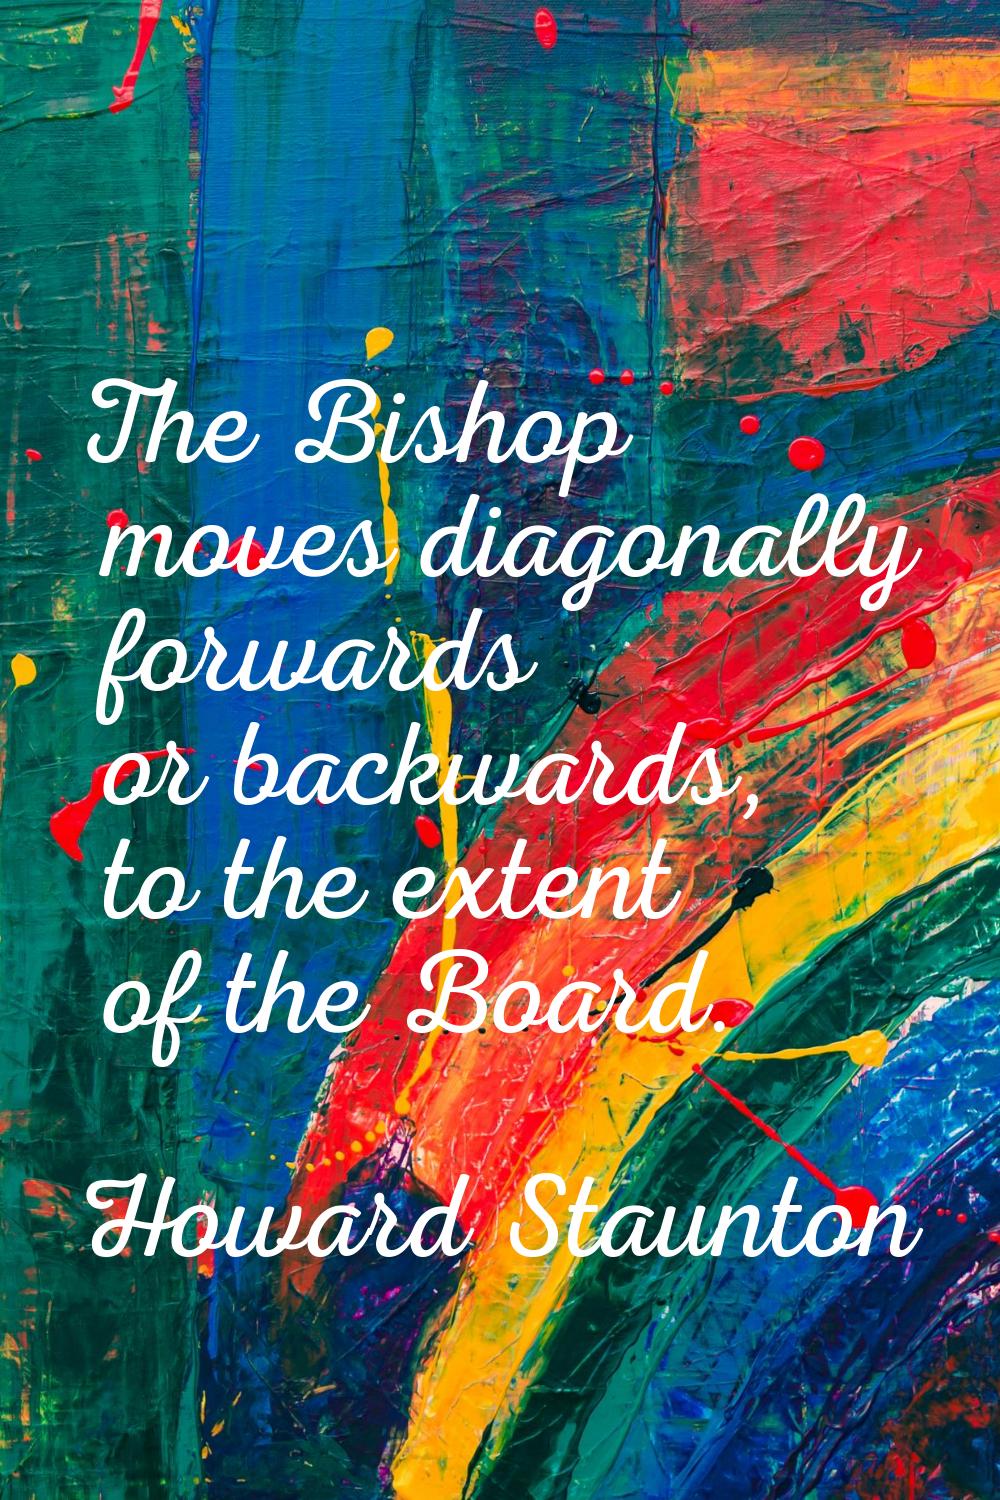 The Bishop moves diagonally forwards or backwards, to the extent of the Board.